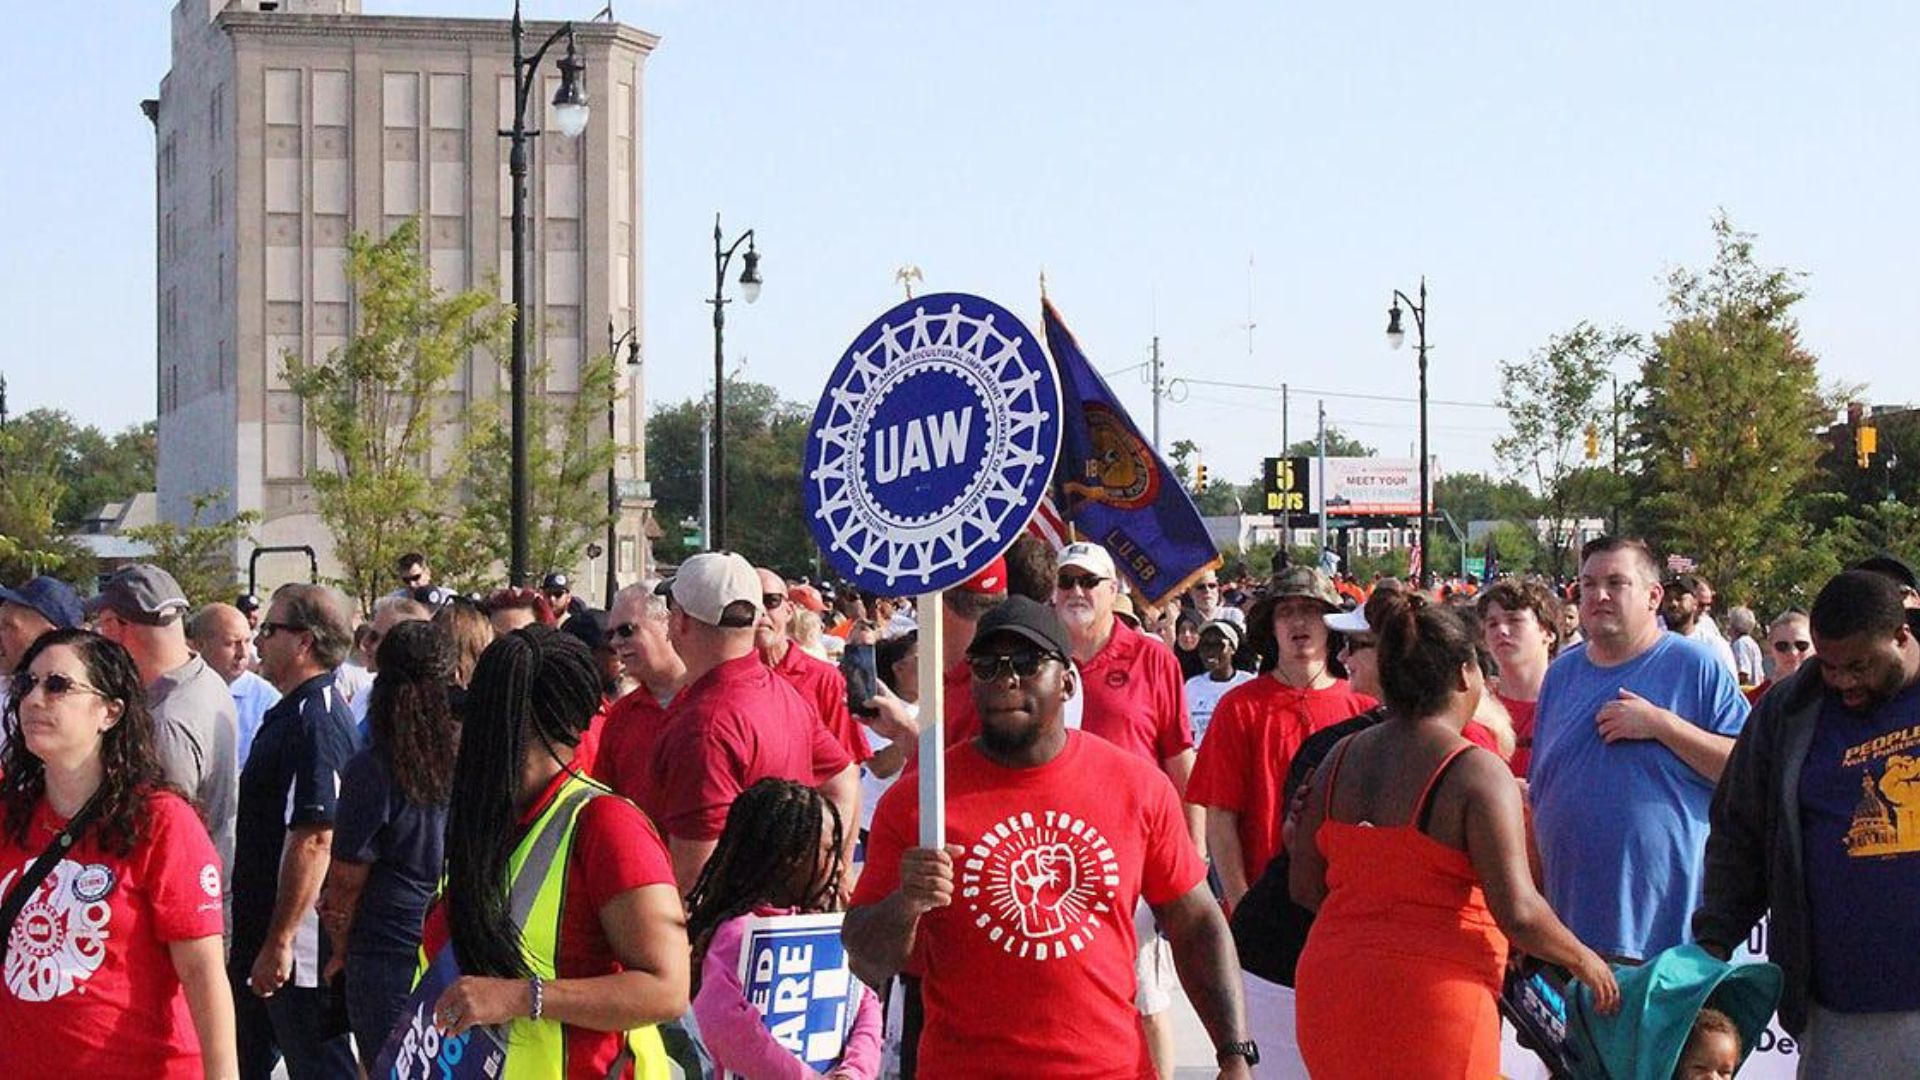 The UAW union received a counteroffer from GM, which included a proposed 16% wage increase and a 56% pay increase for new workers